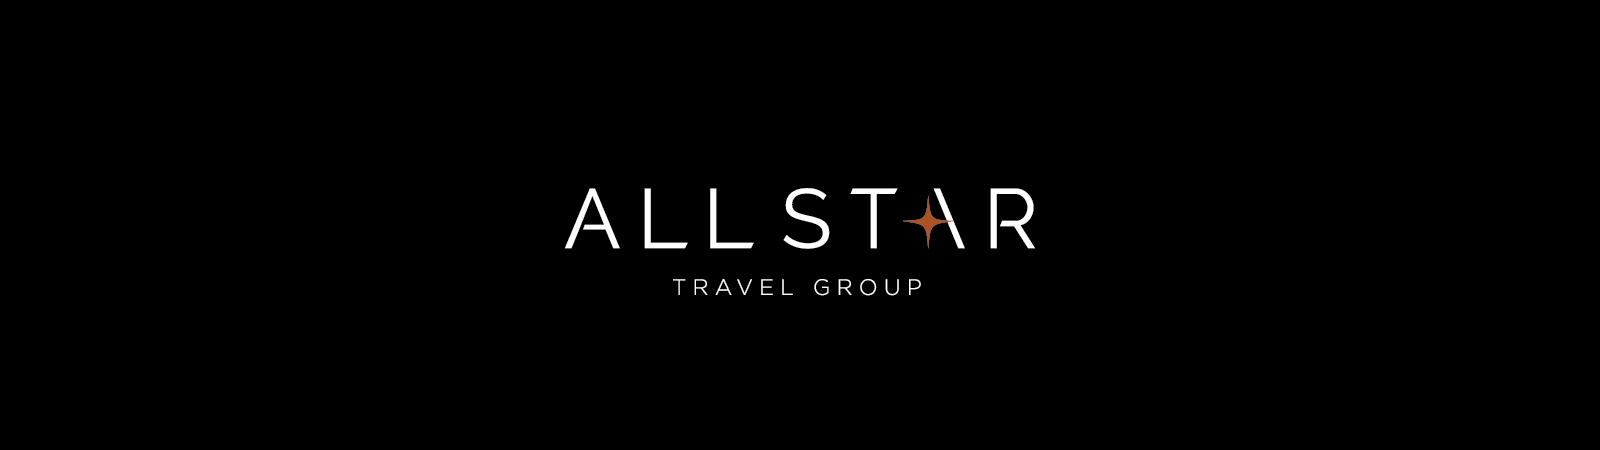 All Star Travel Group